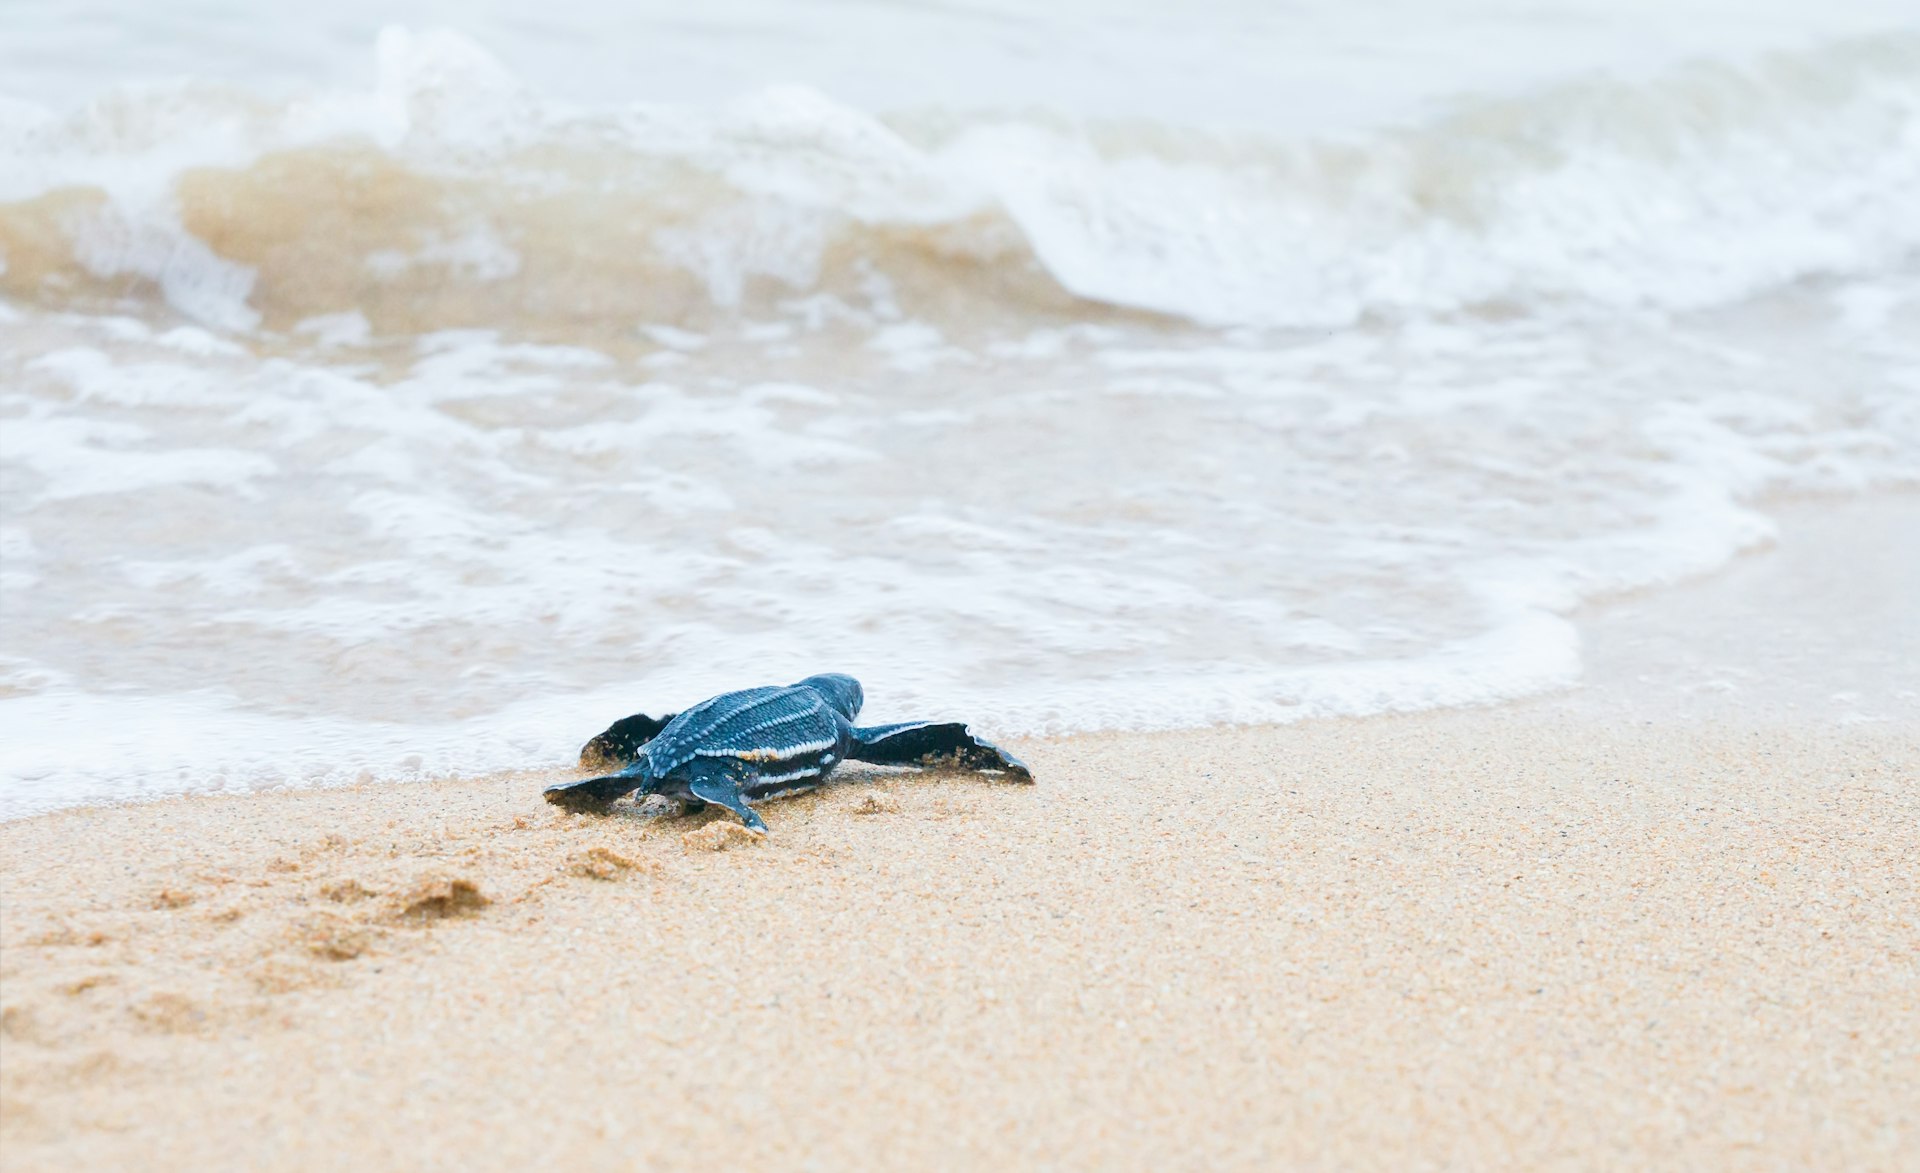 Newly hatched baby turtles crawl to the surf